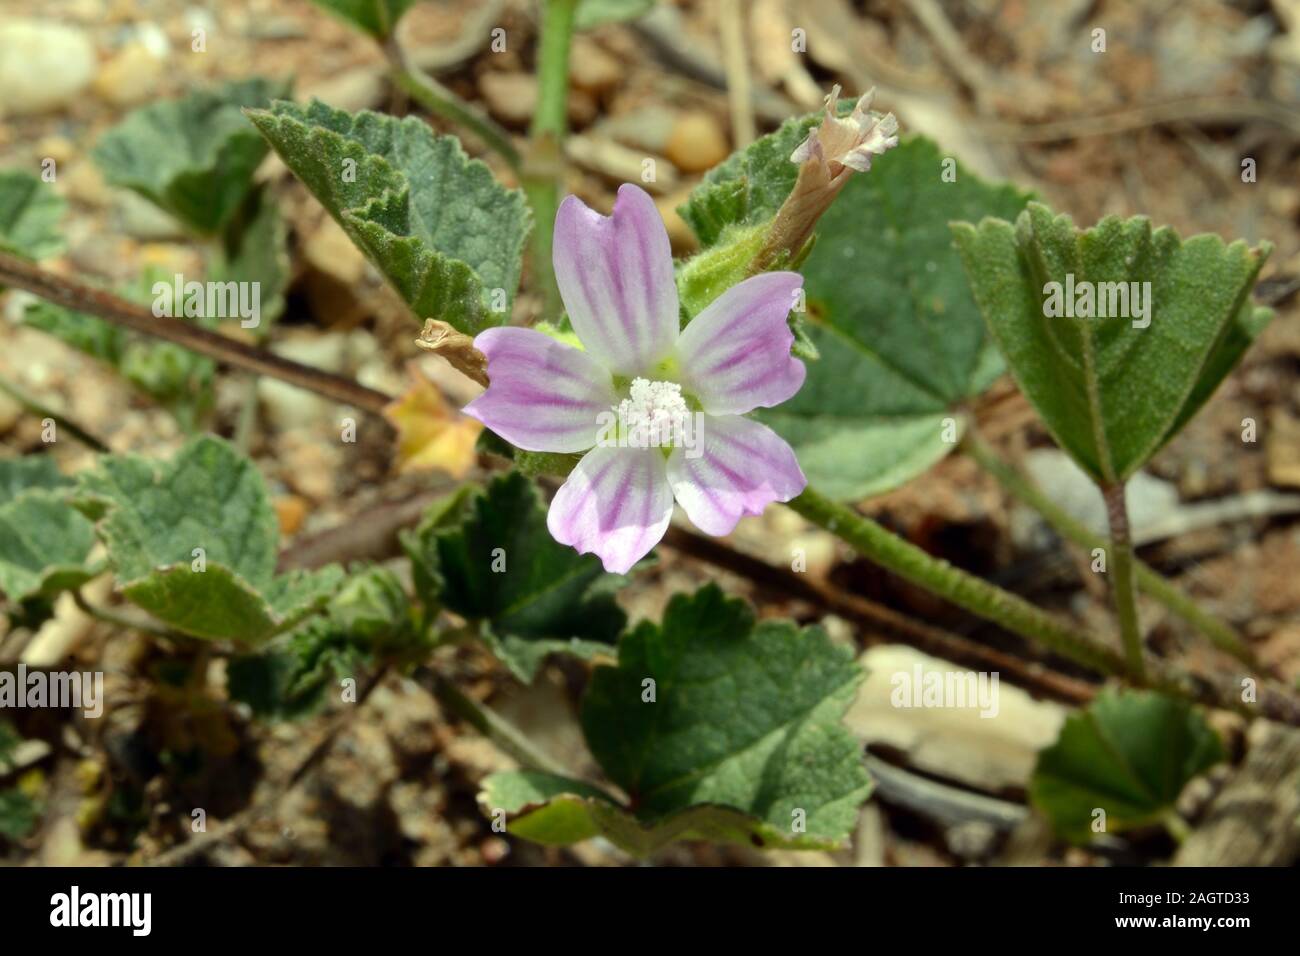 Malva multiflora (small tree mallow) can be found throughout the Mediterranean region mainly on cultivated and disturbed ground. Stock Photo